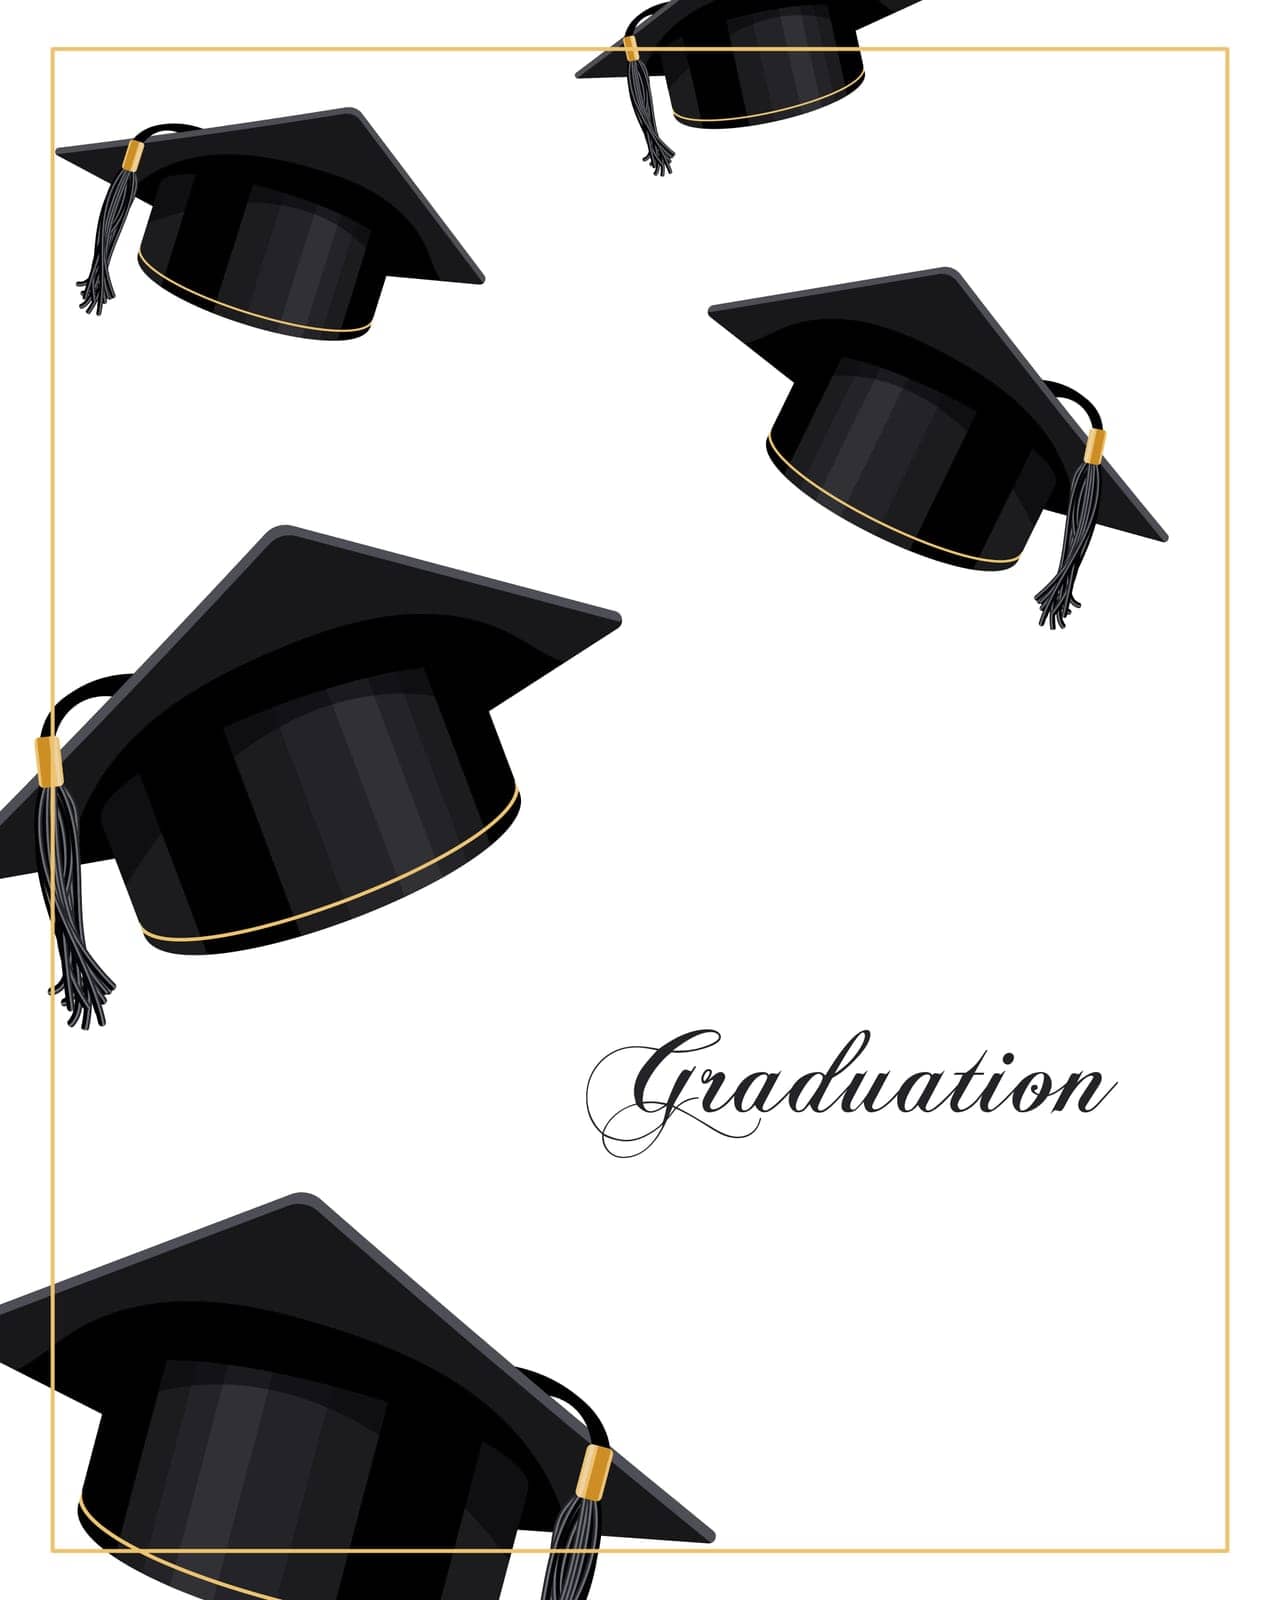 Graduation banner with flying graduation caps. Design for graduate diploma, awards. Education concept. by VS1959